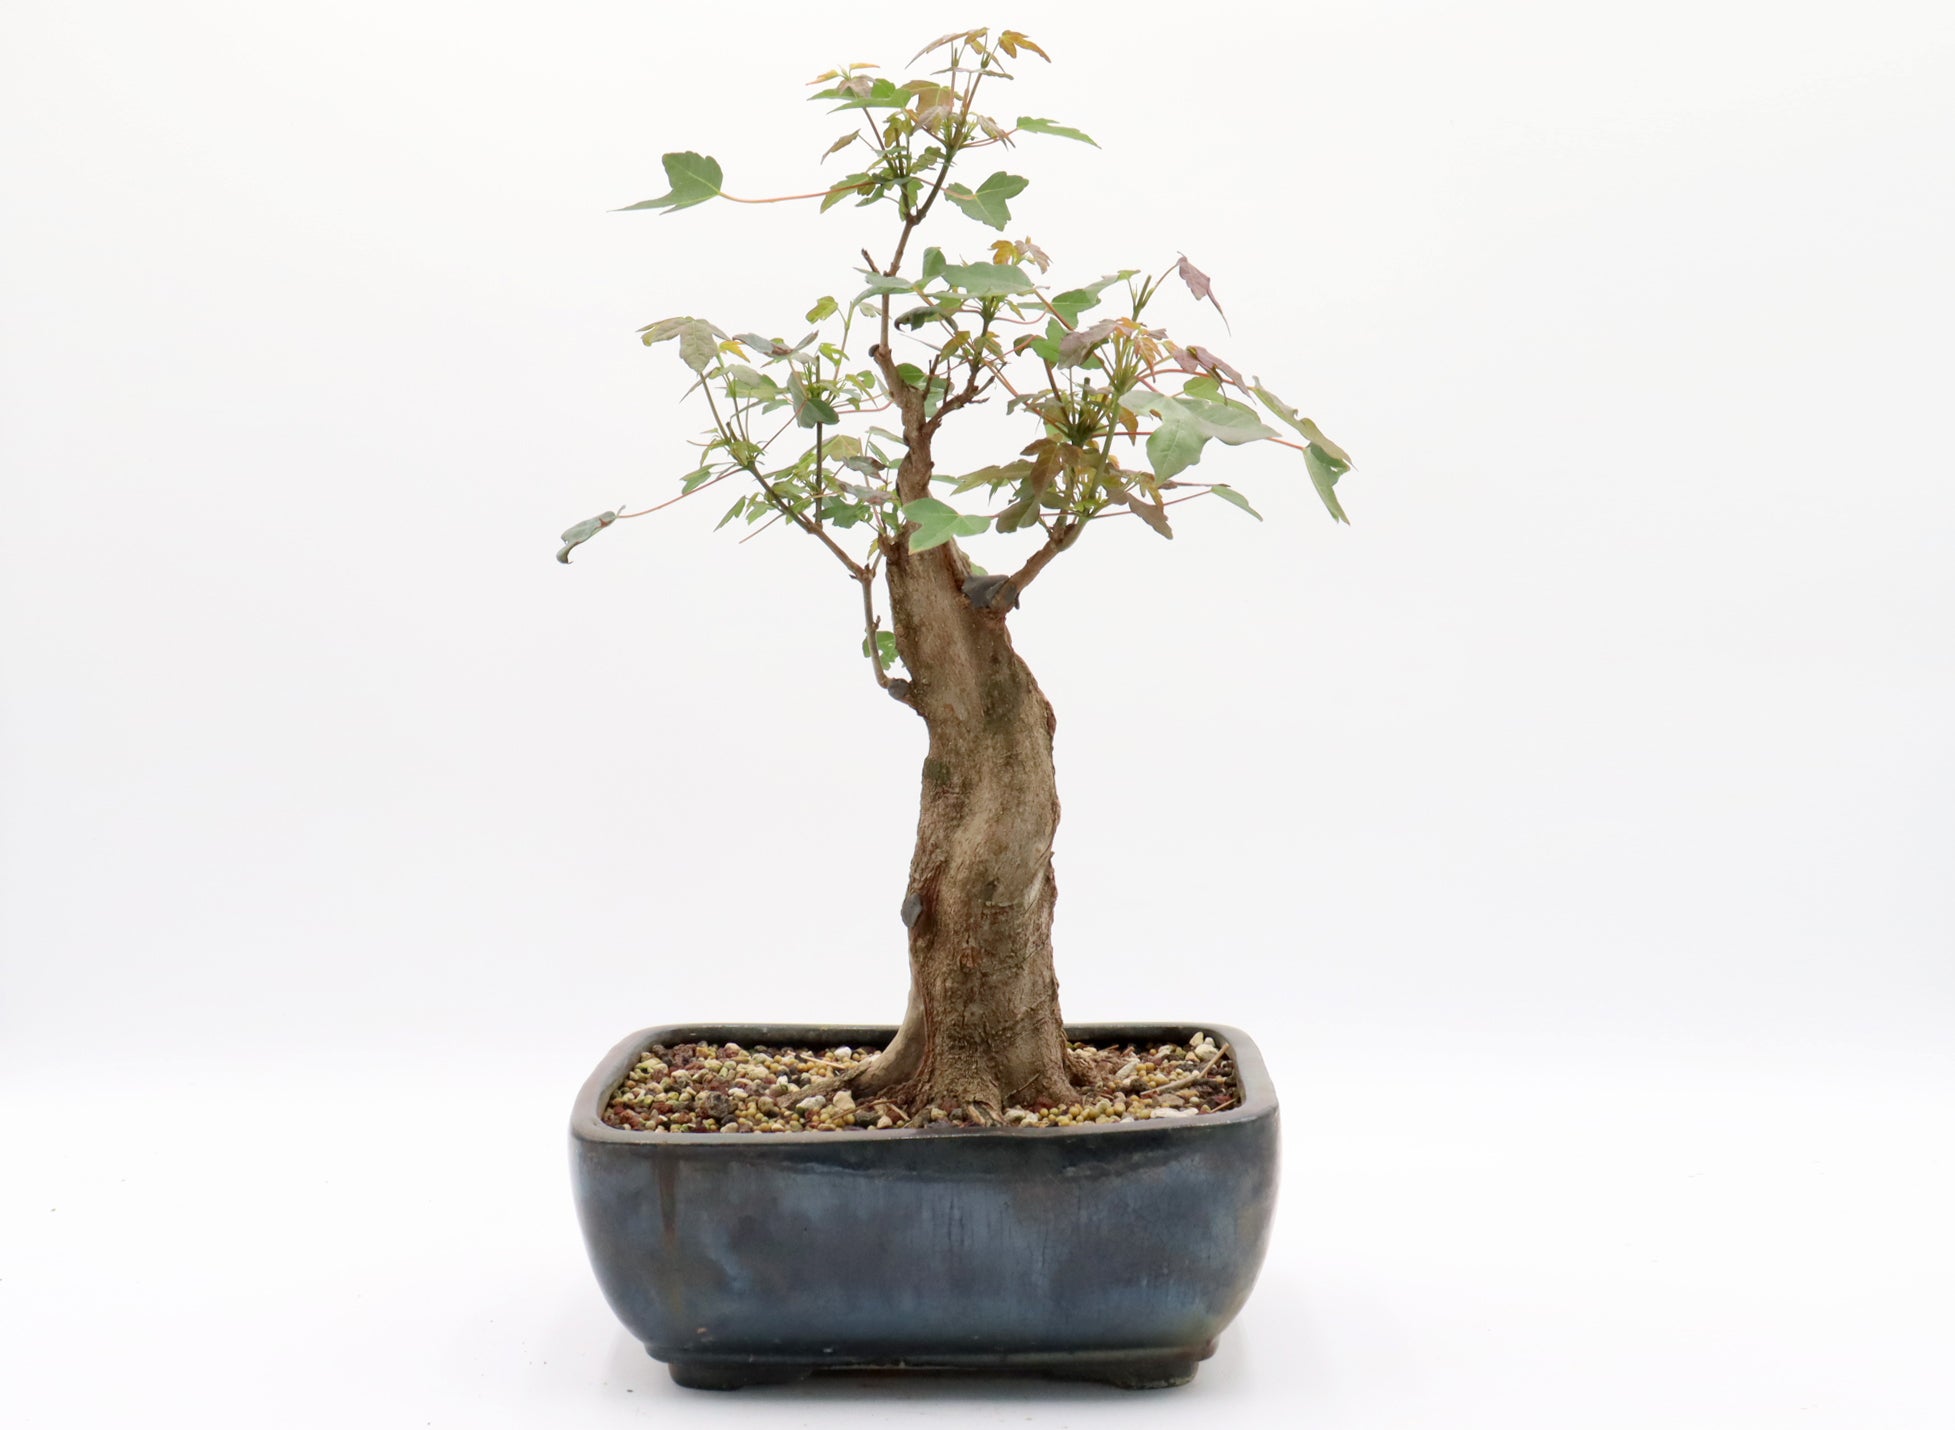 Trident Maple Bonsai in a Chinese Container